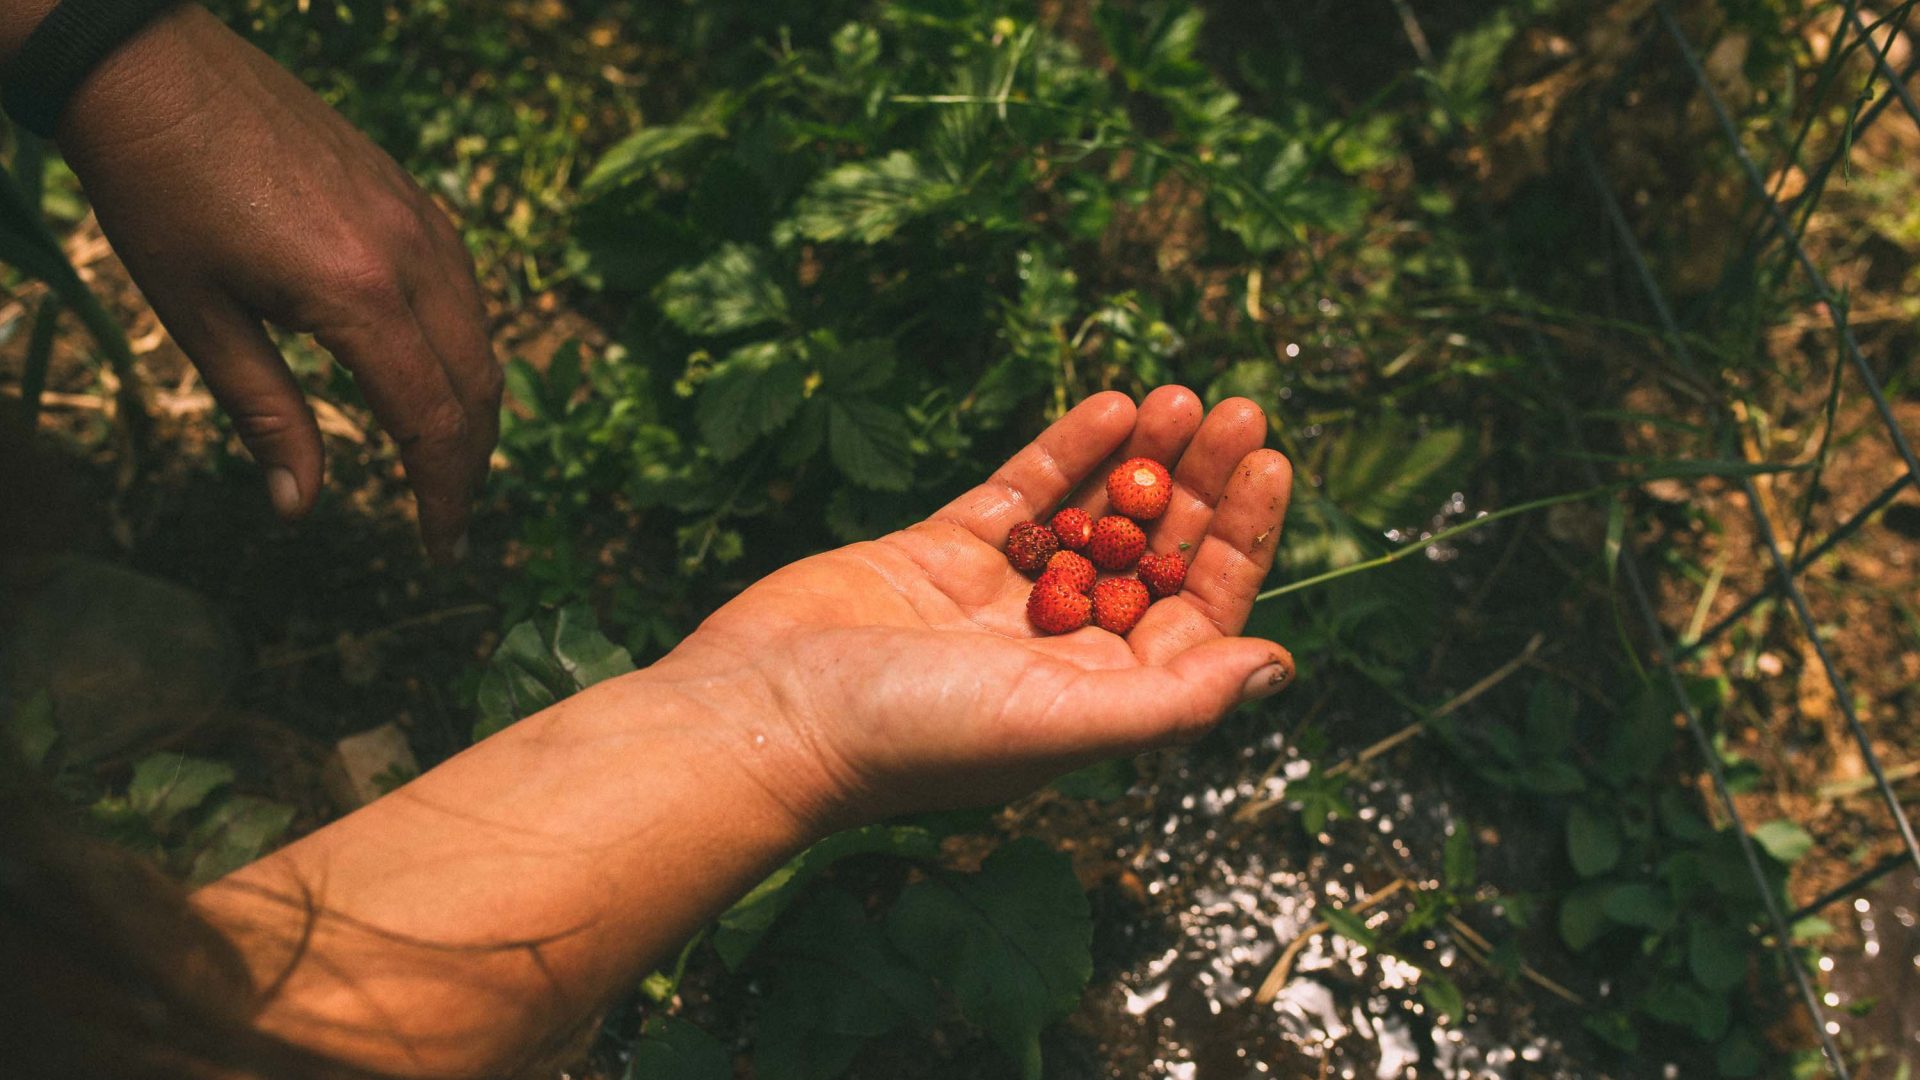 A hand holding red berries.